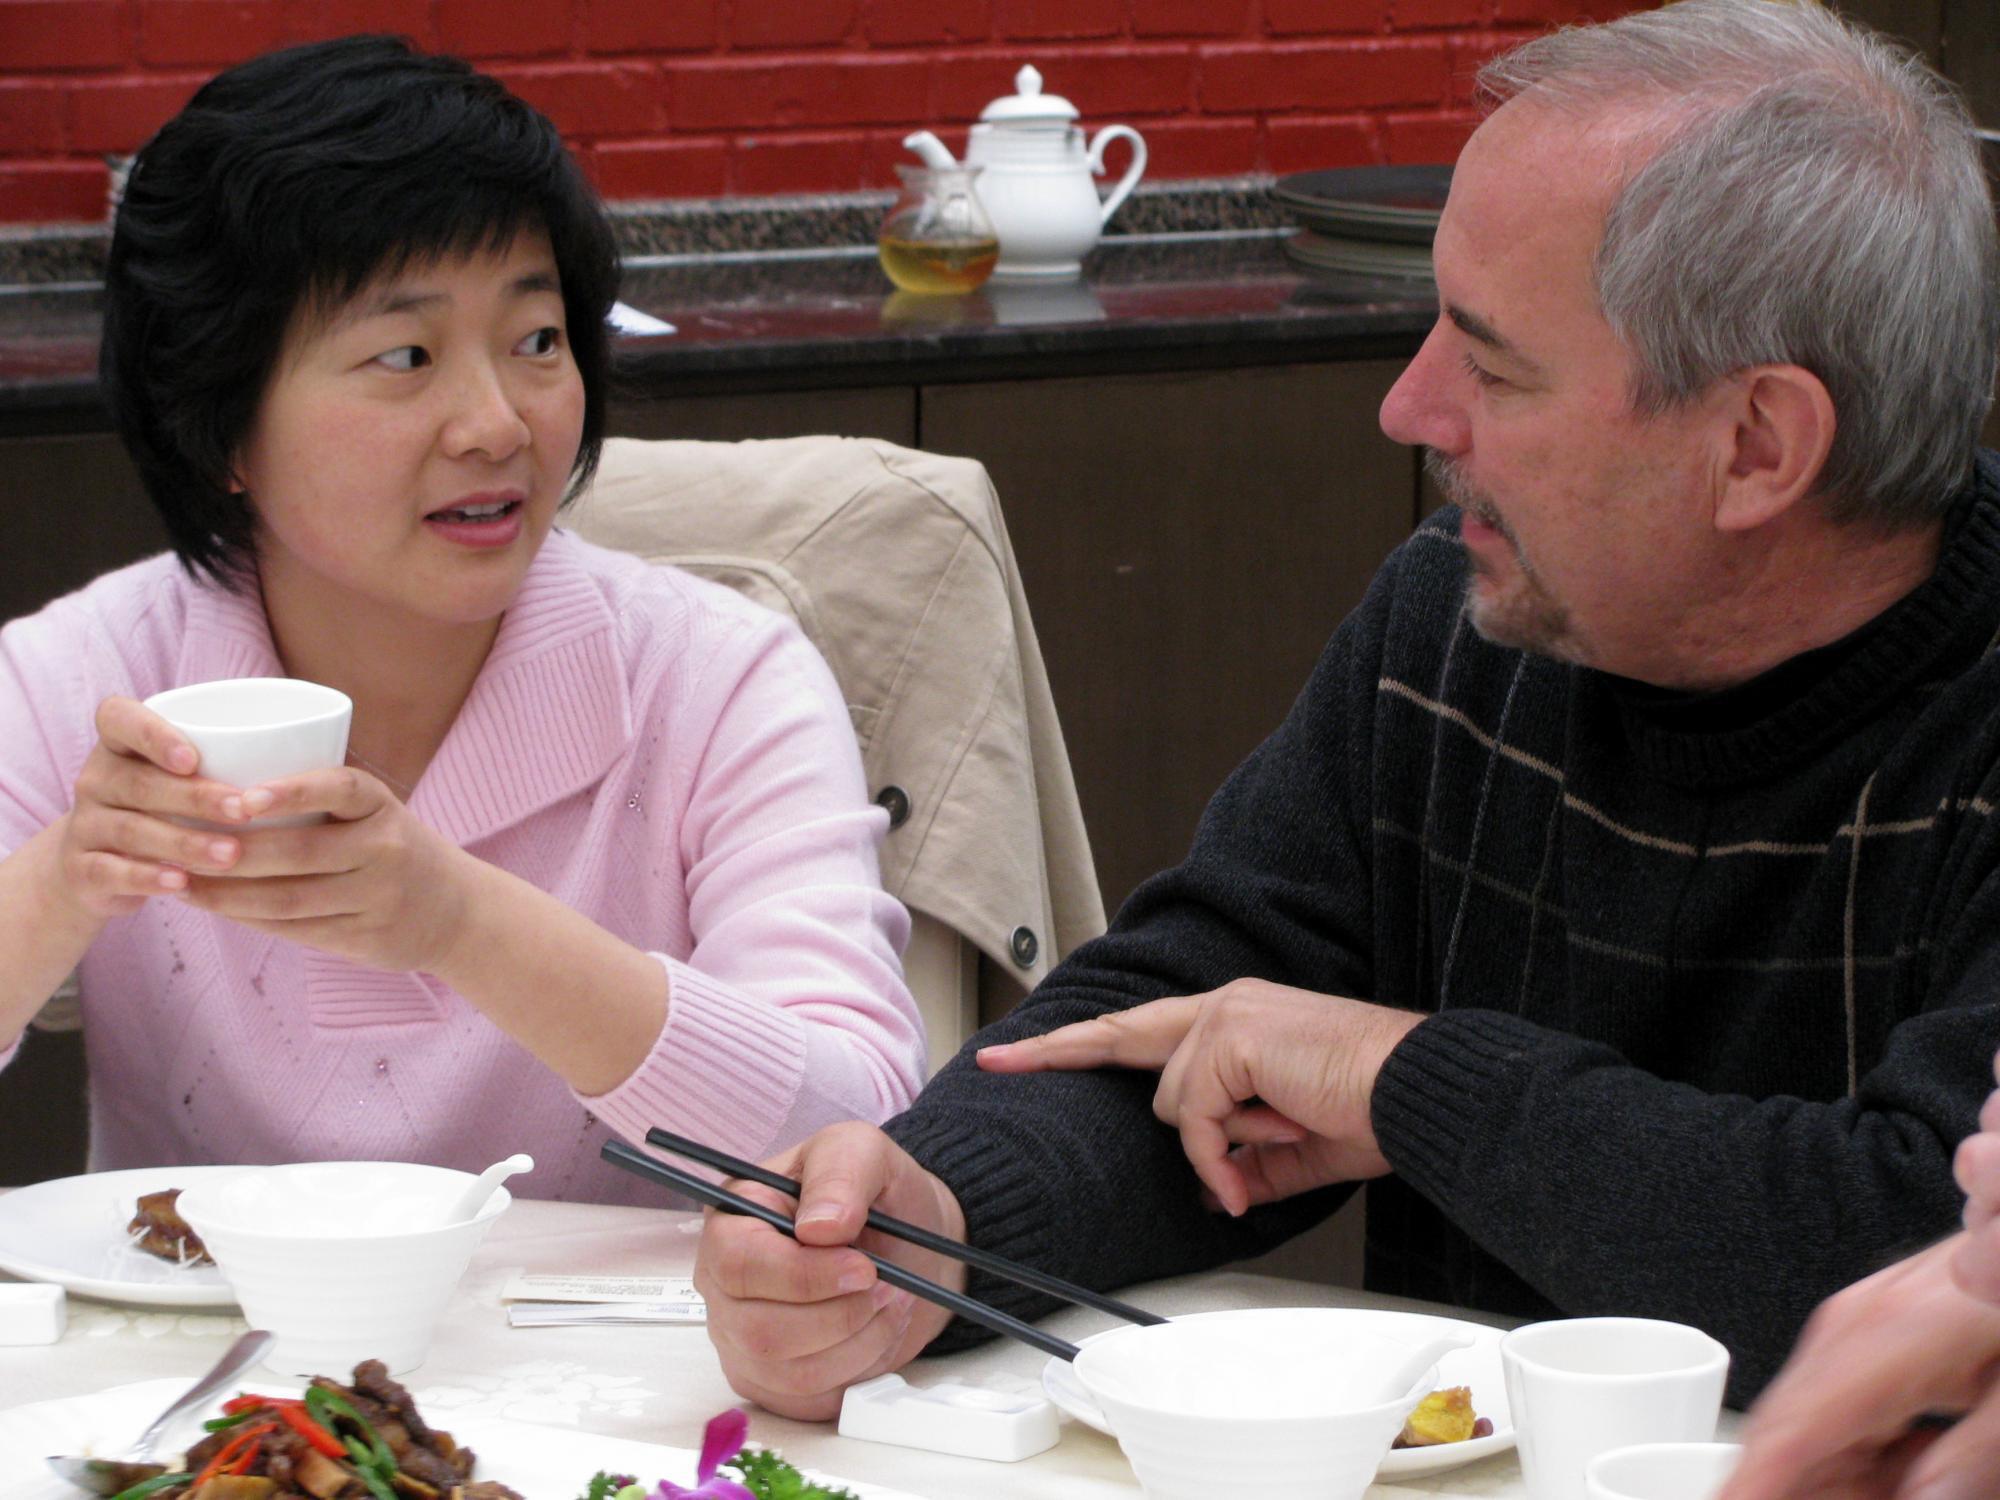 Two people seated at a table sharing dinner